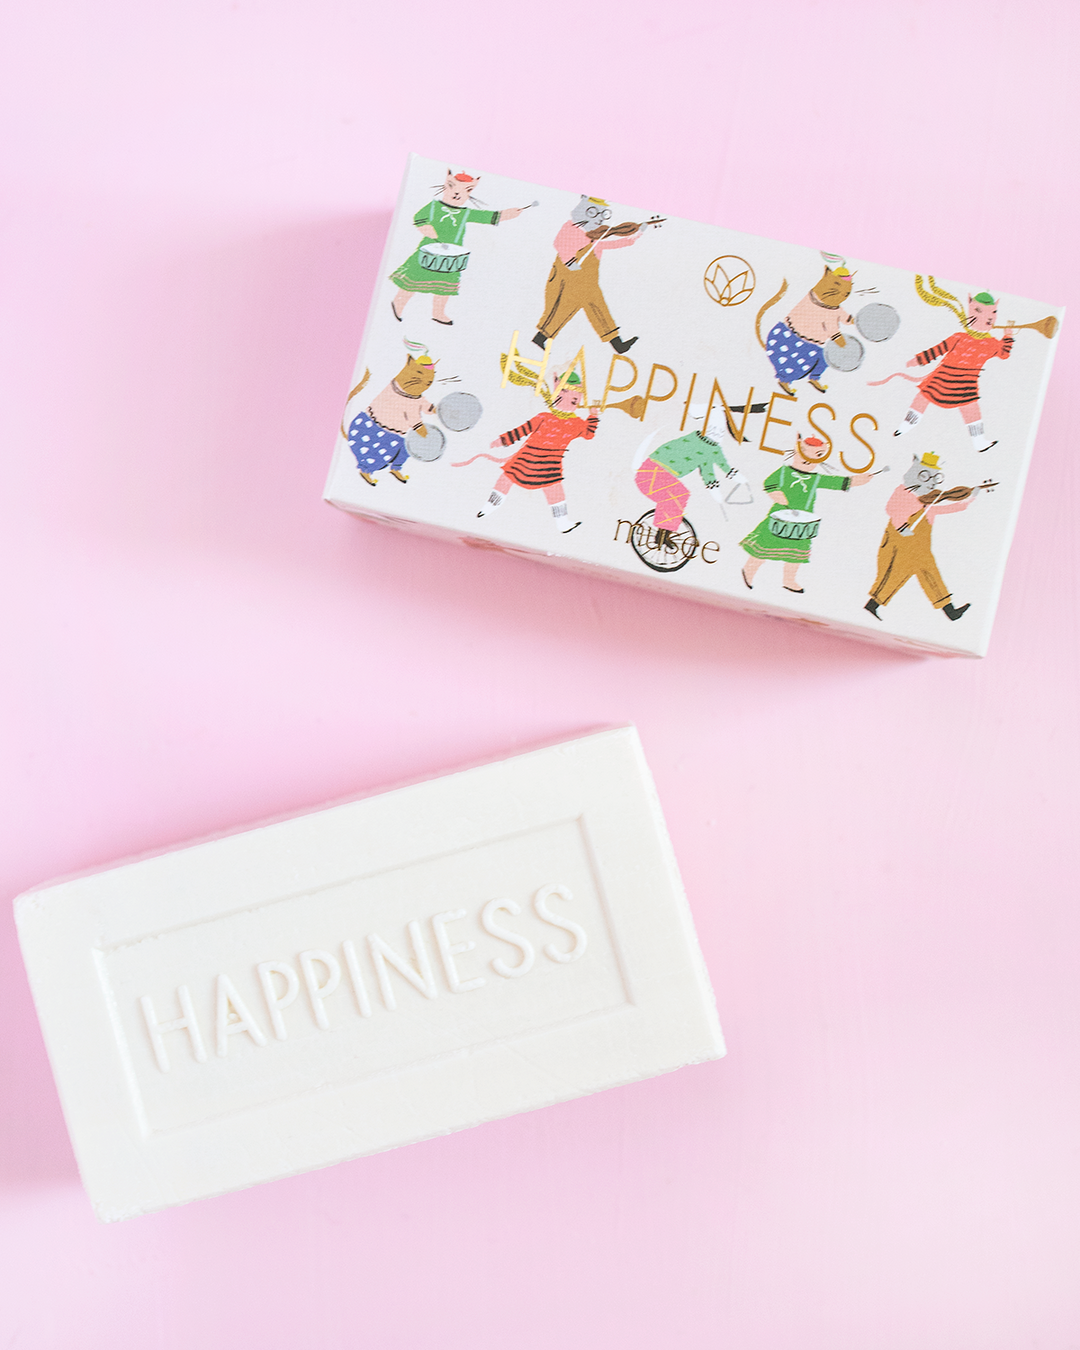 HAPPINESS SOAP - Kingfisher Road - Online Boutique